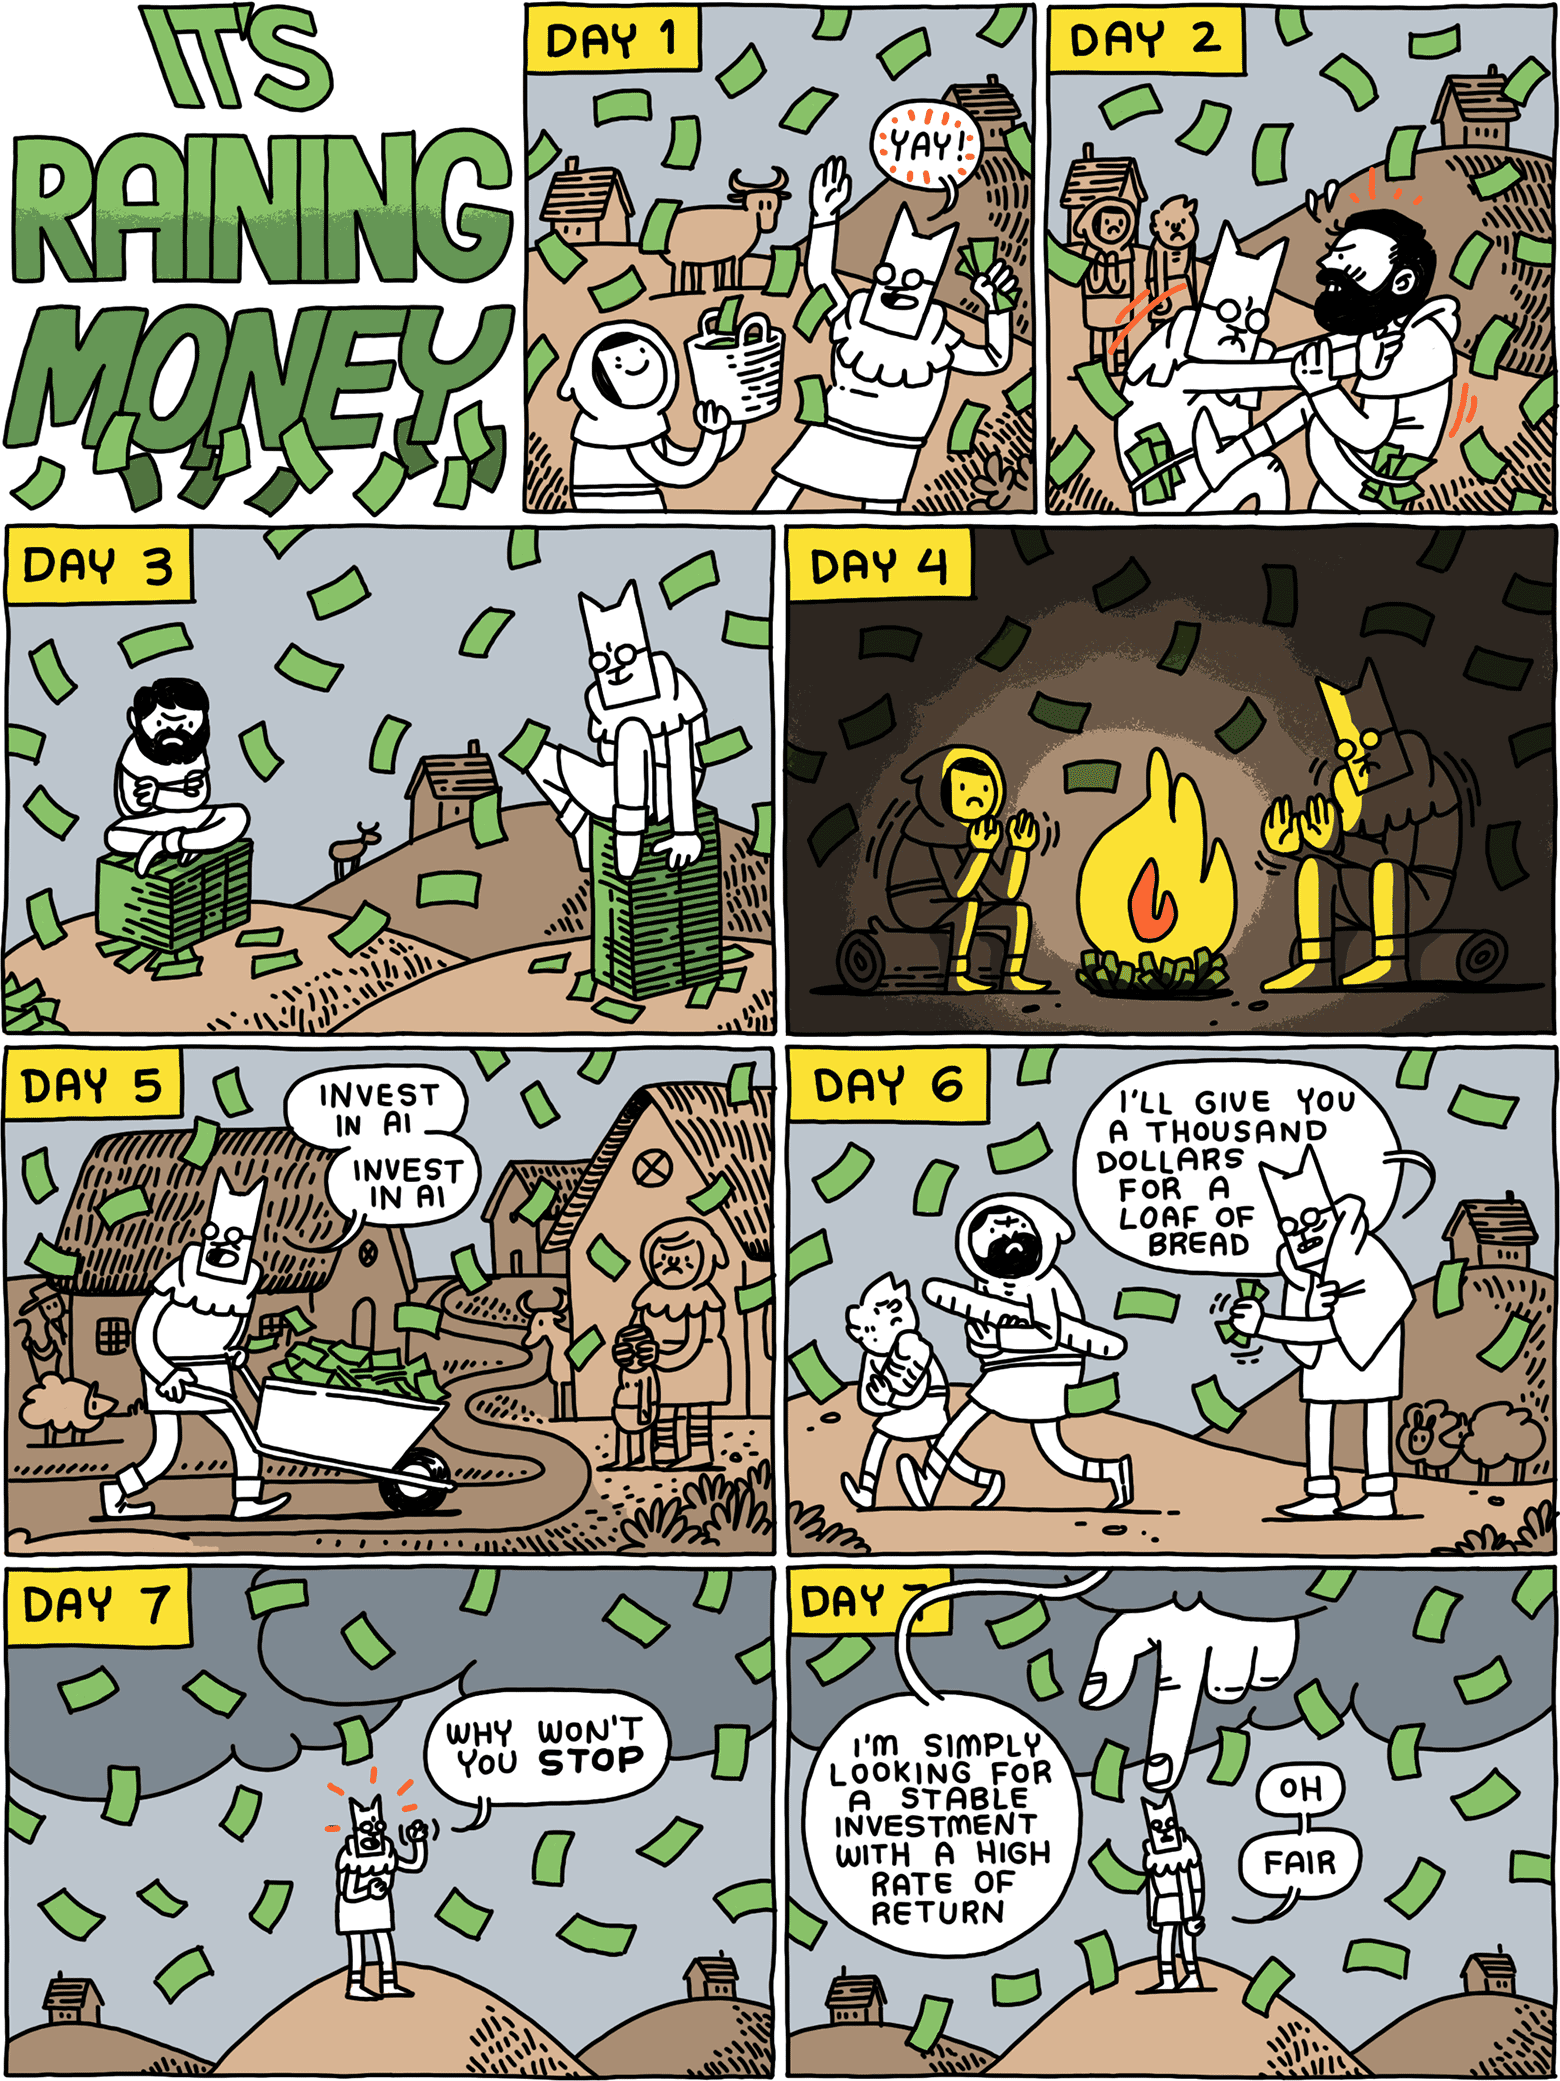 IT’S RAINING MONEY / DAY 1/ Cat: Yay! / DAY 2/ (Cat and Beatnik Vampire fight over the money) / DAY 3/ (Cat and Beatnik Vampire sit on their stacks of money) / DAY 4/ (Cat and Girl warm themselves at a money bonfire) / DAY 5/ Cat (pushing a wheelbarrow full of money): Invest in AI - Invest in AI / DAY 6/ Cat: I’ll give you a thousand dollars for a loaf of bread / DAY 7/ Cat: Why won’t you STOP / Giant hand from the sky: I’m simply looking for a stable investment with a high rate of return Cat: Oh - fair